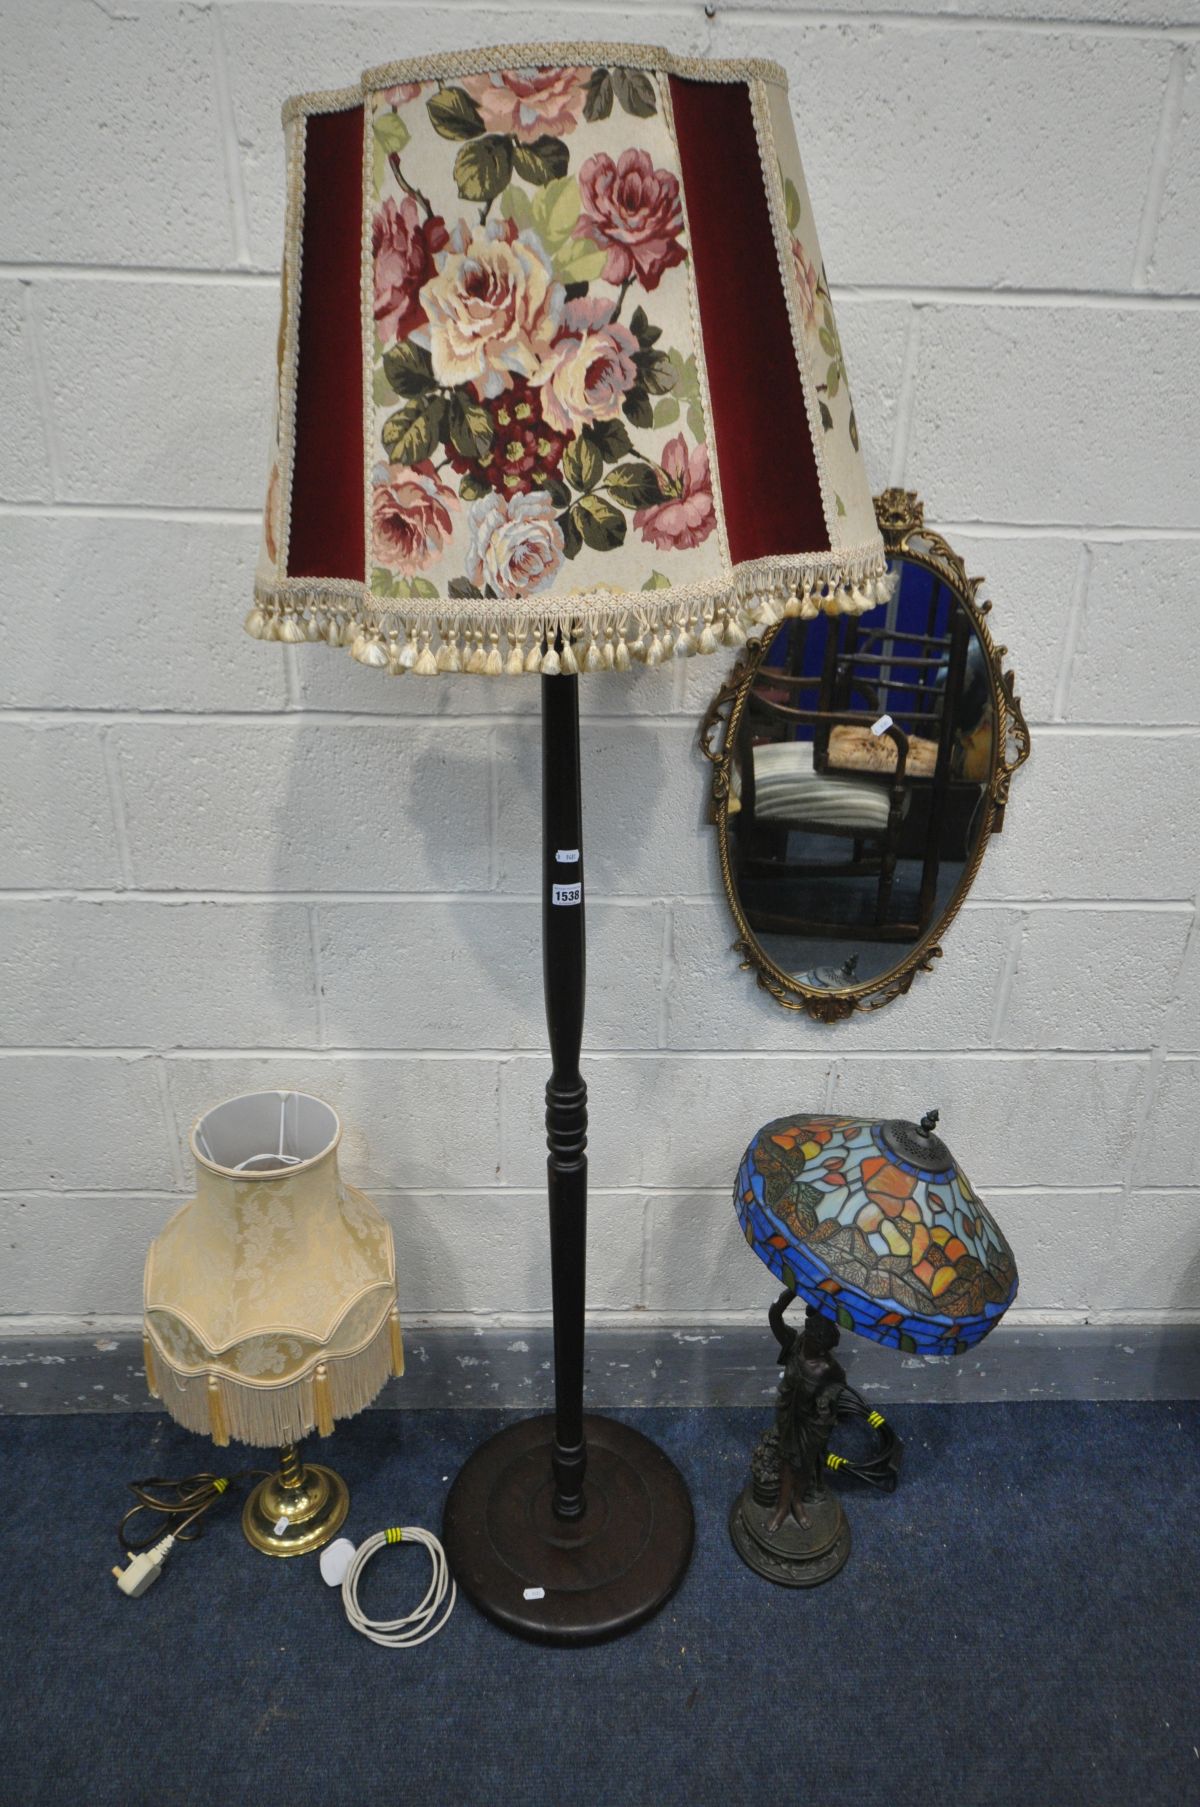 A TIFFANY STYLE FIGURAL STANDARD LAMP (condition:-broken at arm, see image) along with an ornate